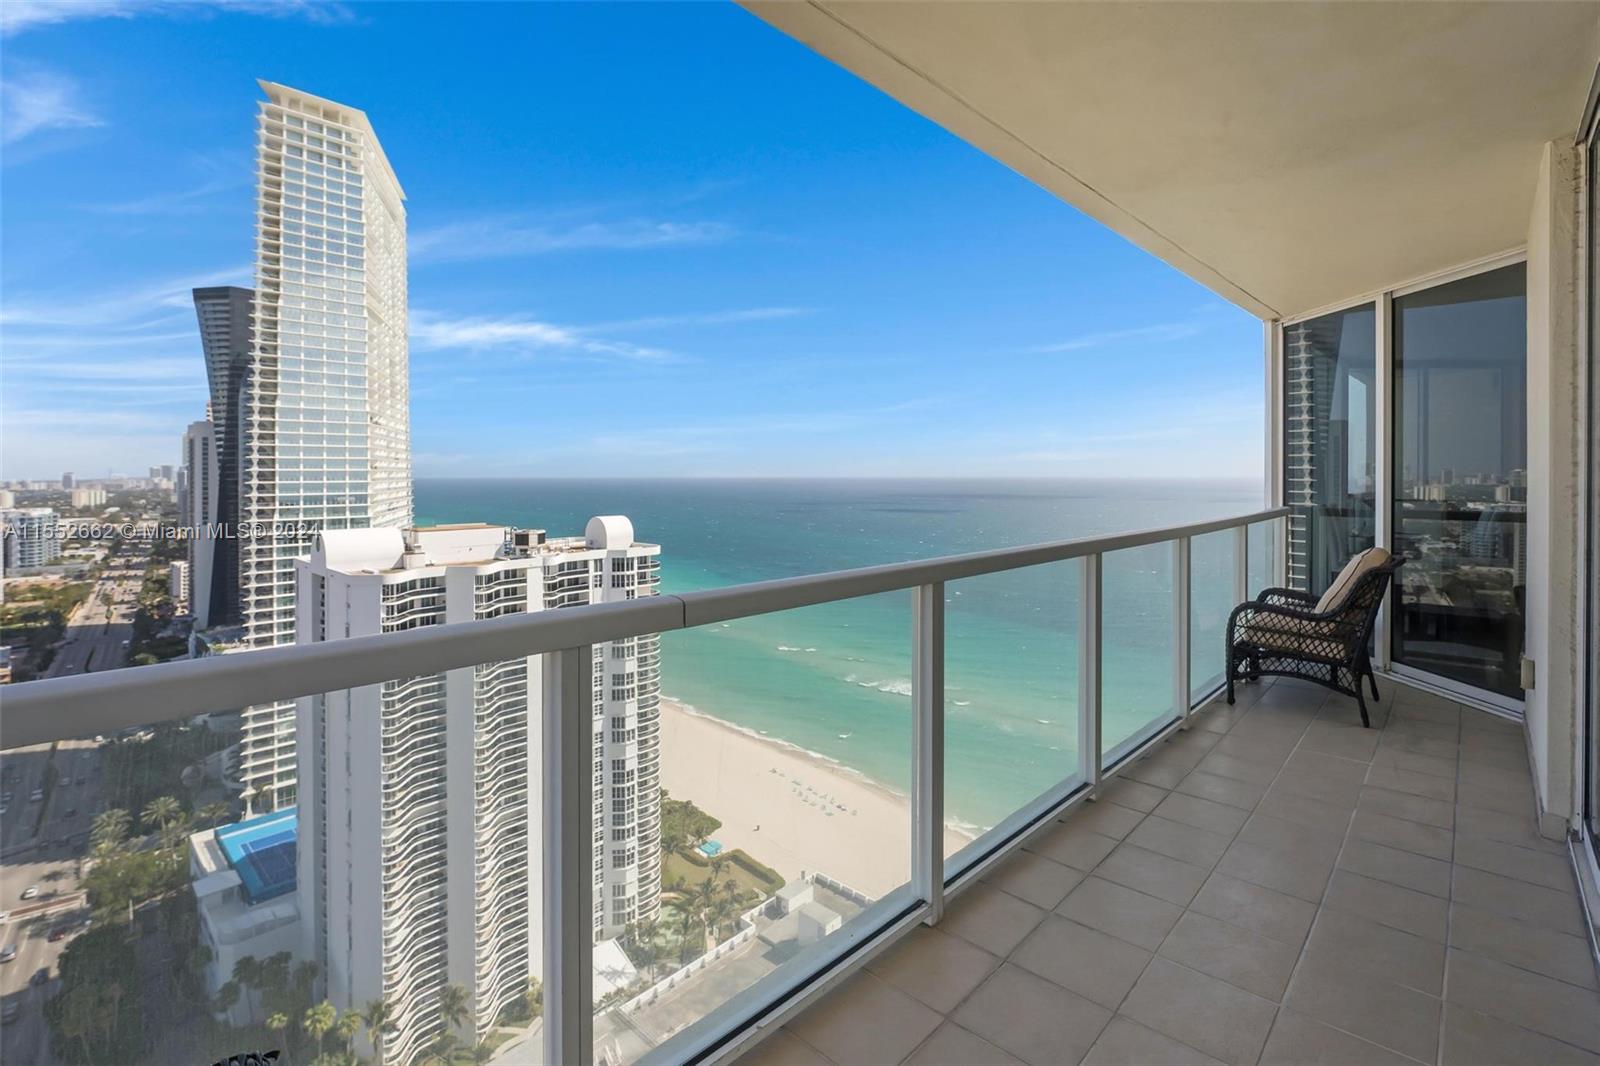 Stunning and spacious 2/2 corner unit (1,423 sf) now available for rent at La Perla, oceanfront condominiums in Sunny Isles Beach! This condo comes furnished, is vacant, and ready to occupy. With marble floors throughout, floor-to-ceiling high-impact windows, and wrap around balcony, unit 3704 features high-floor views of the ocean, Collins Ave, and Intracoastal. The split bedroom layout offers privacy, while the many closets (primary bedroom walk-in) offer plenty of storage. Main bedroom includes balcony access, double sinks in the bathroom, oversized tub and shower. The unit also boasts an open kitchen and laundry room inside of the unit. Enjoy the many bldg. amenities such as the pool, jacuzzi, sports lounge, kids' room, 24-hr security, attended lobby, ocean access, and beach service.